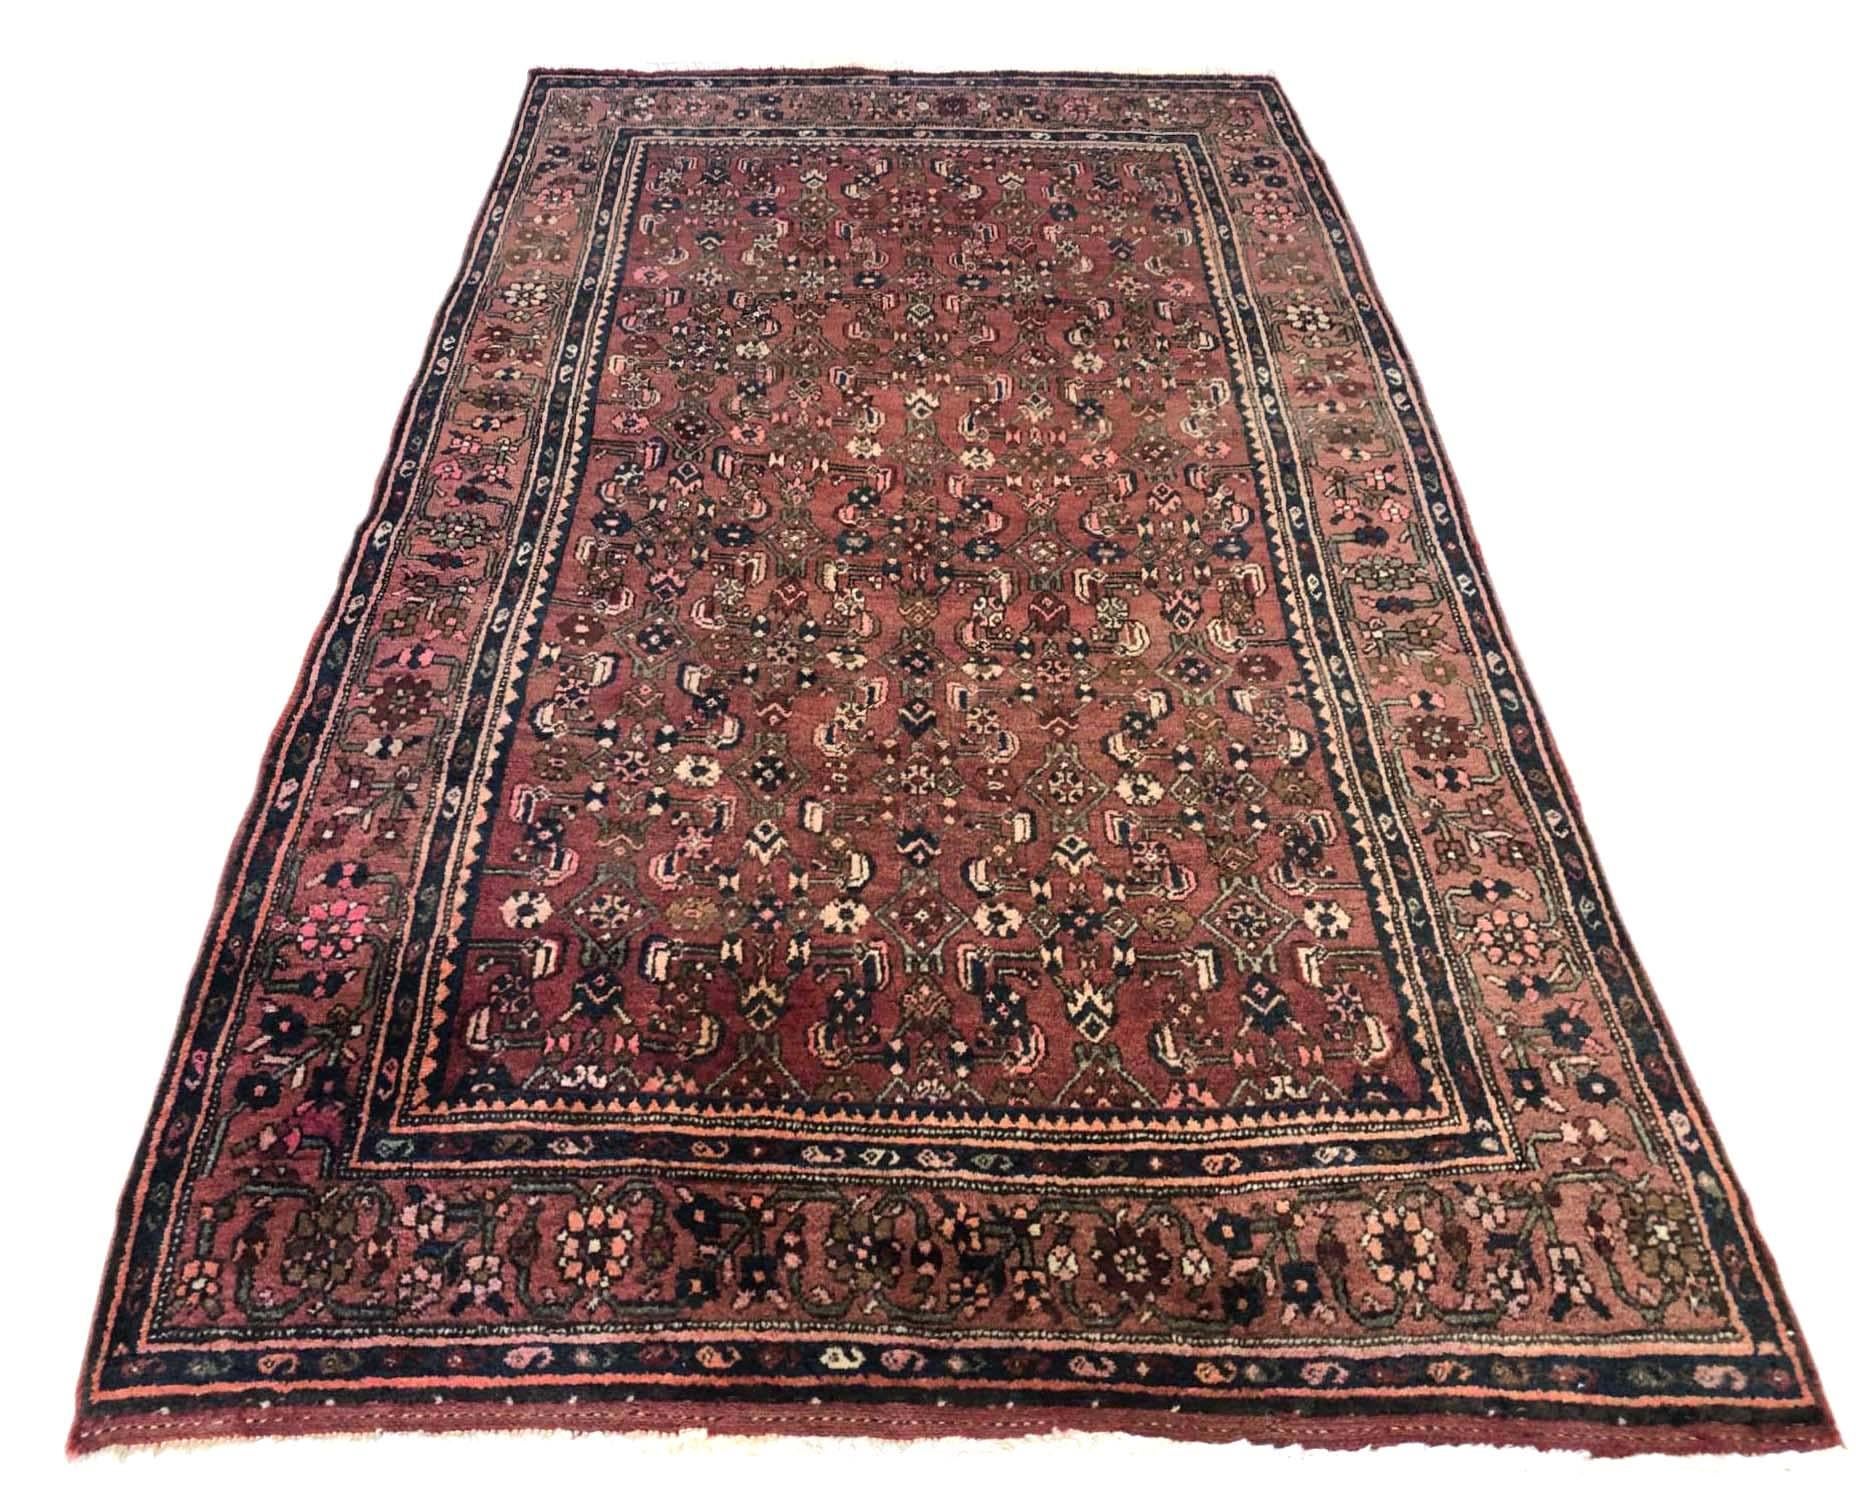 This piece is a handmade Persian Bijar rug. The pile is wool with cotton foundation. This design is all-over fish pattern. Bijar rugs are well-known for their craftsmanship and design. The size is 4 feet 3 inches wide by 7 feet 2 inches tall. This